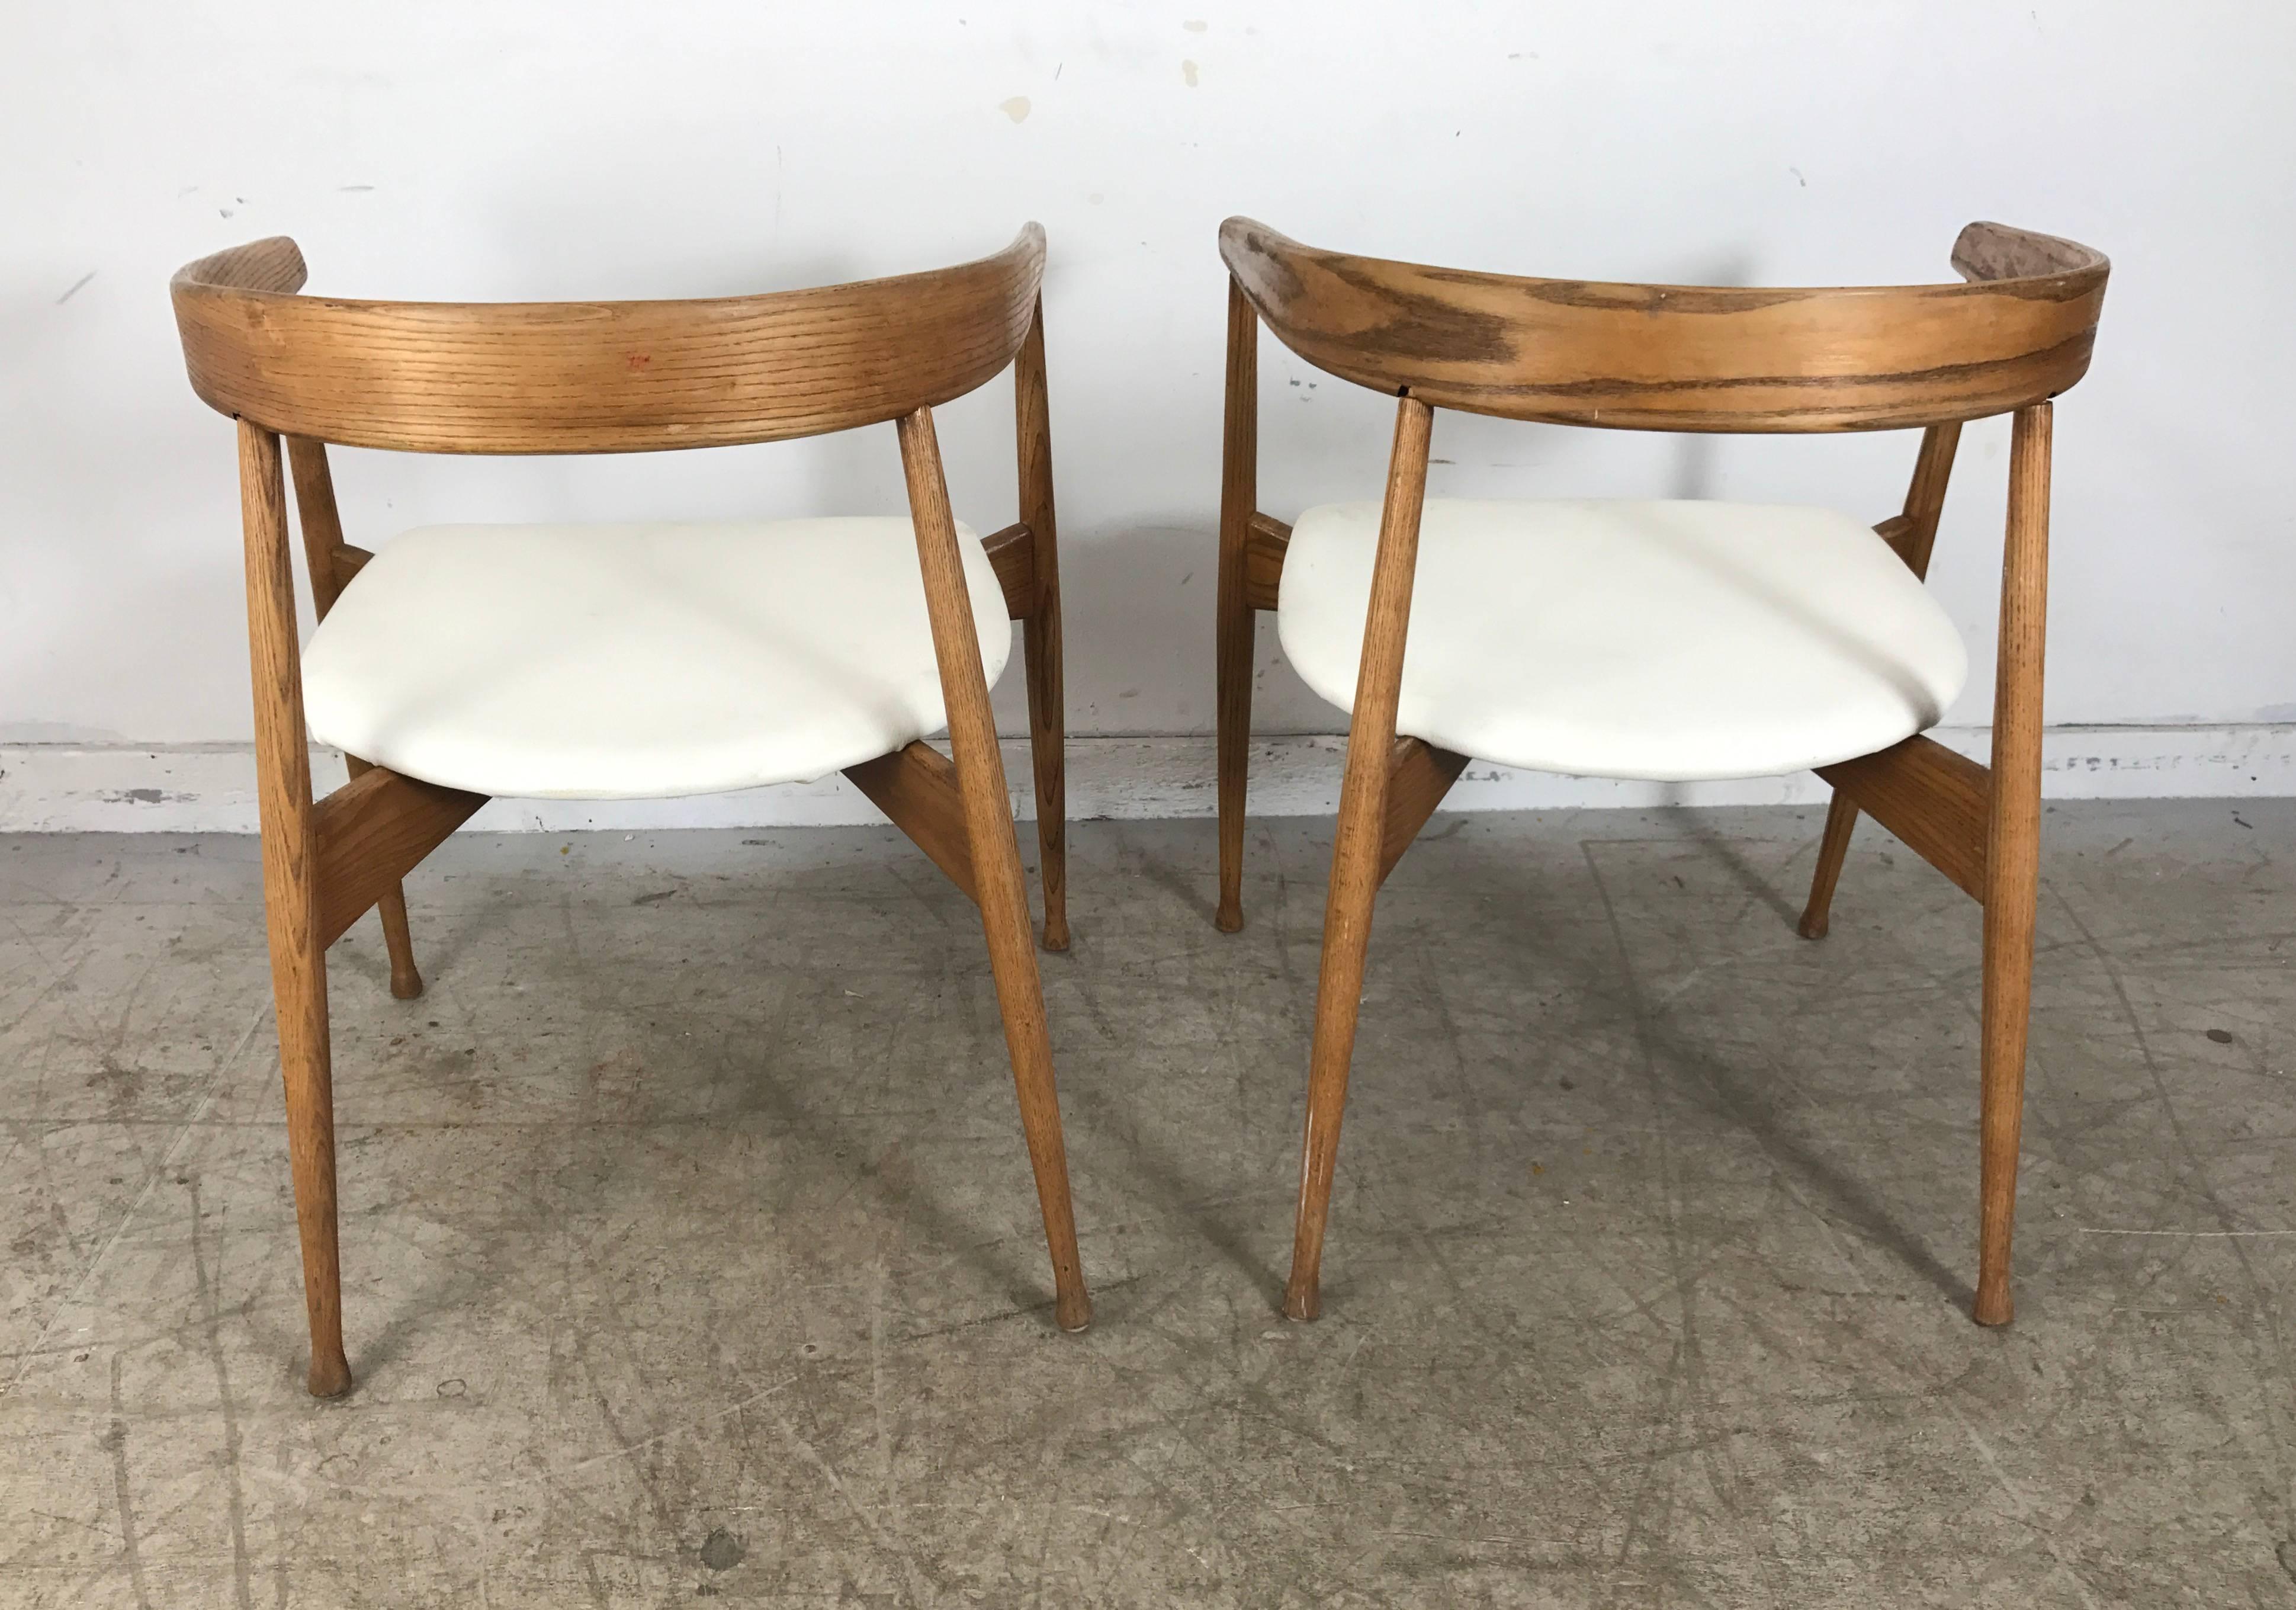 Matched Pair of American Danish Armchairs Manner of Hans Wegner 1